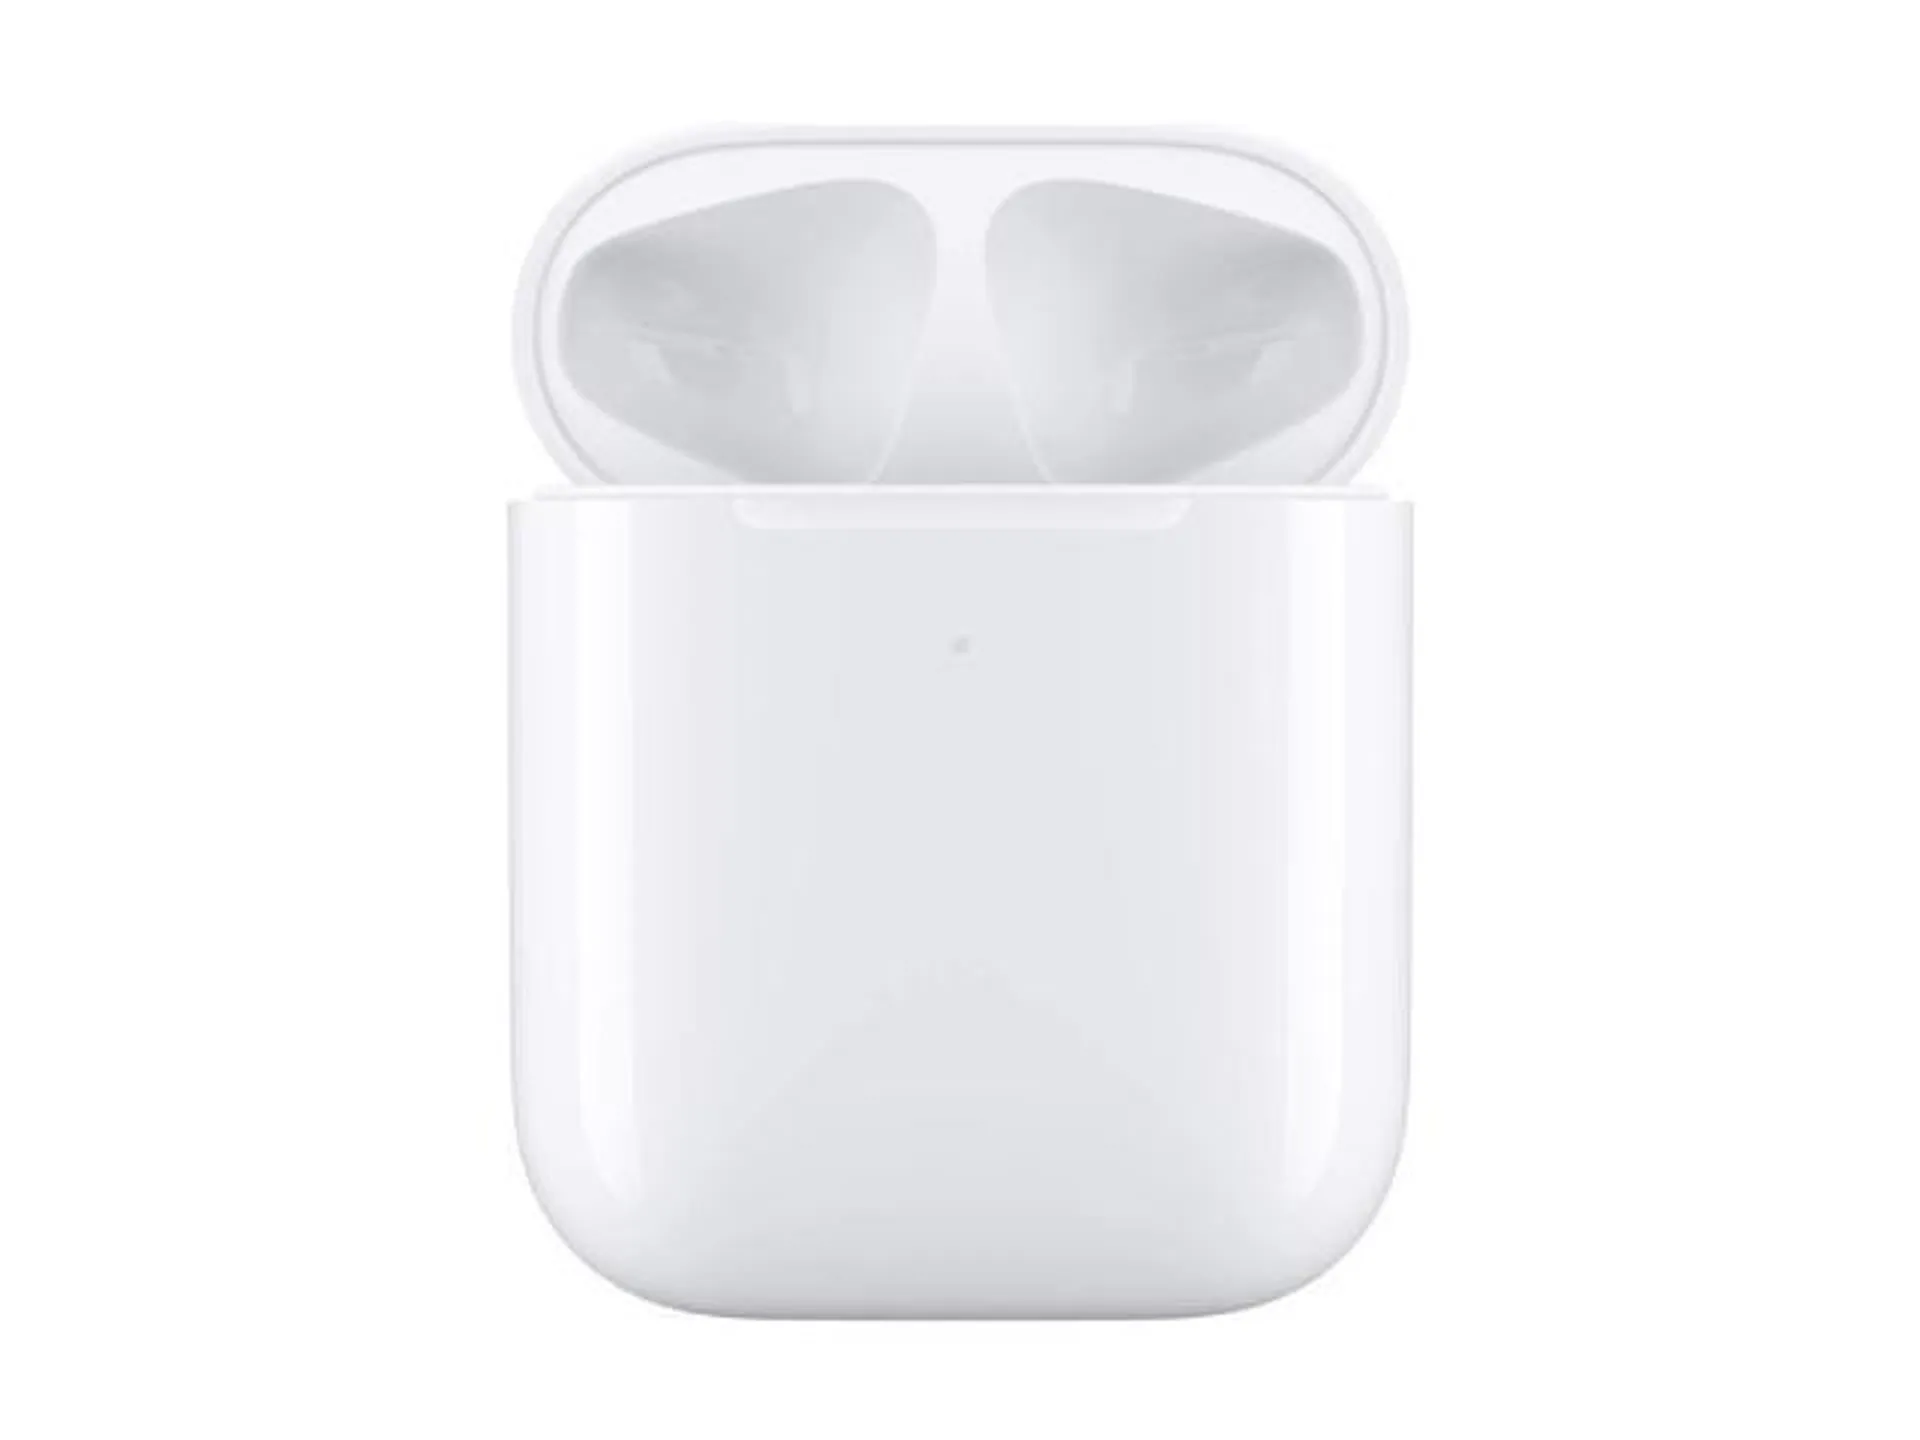 Genuine Apple Wireless Charging Case for Airpods (Refreshed)